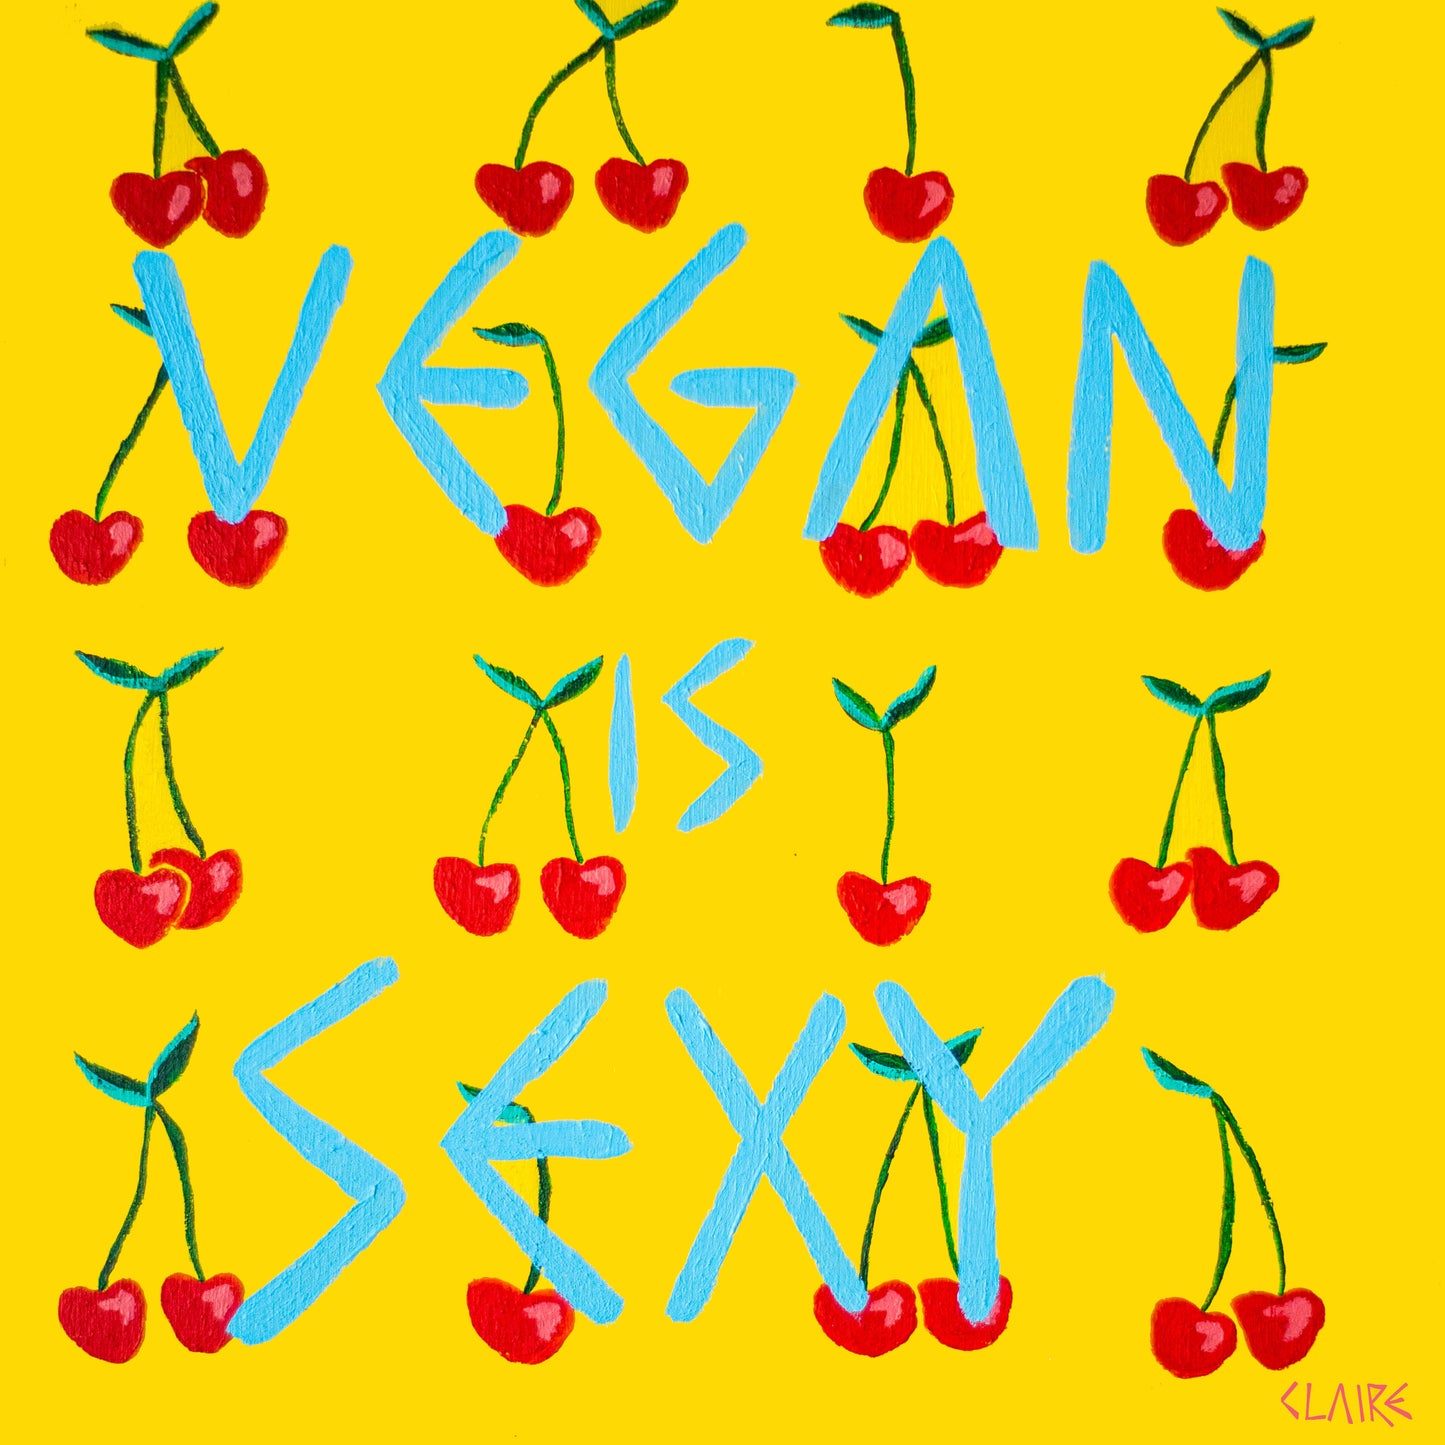 Vegan Is Sexy (Prints Available)